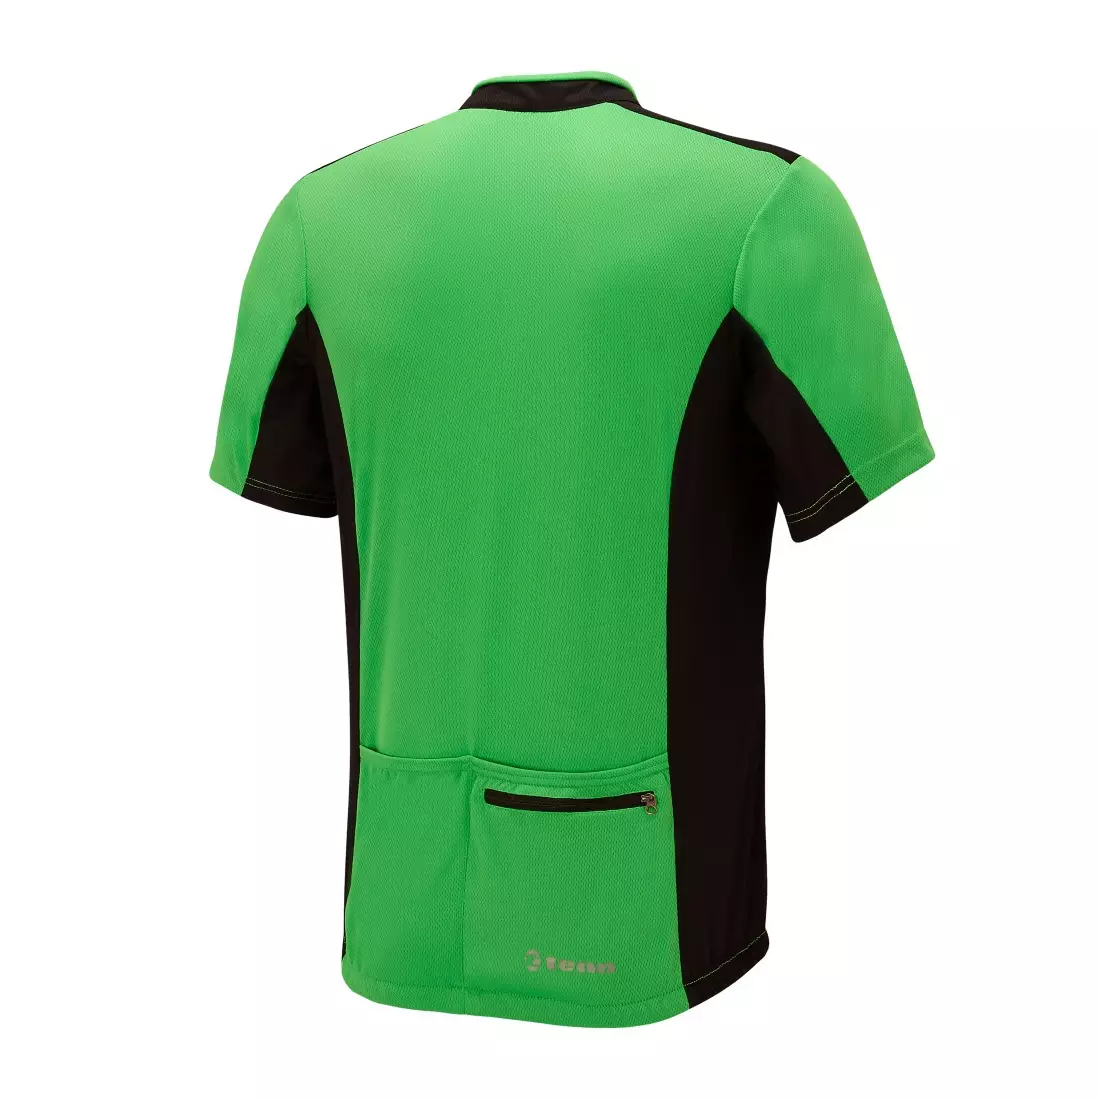 TENN OUTDOORS COOLFLO men's cycling jersey green and black